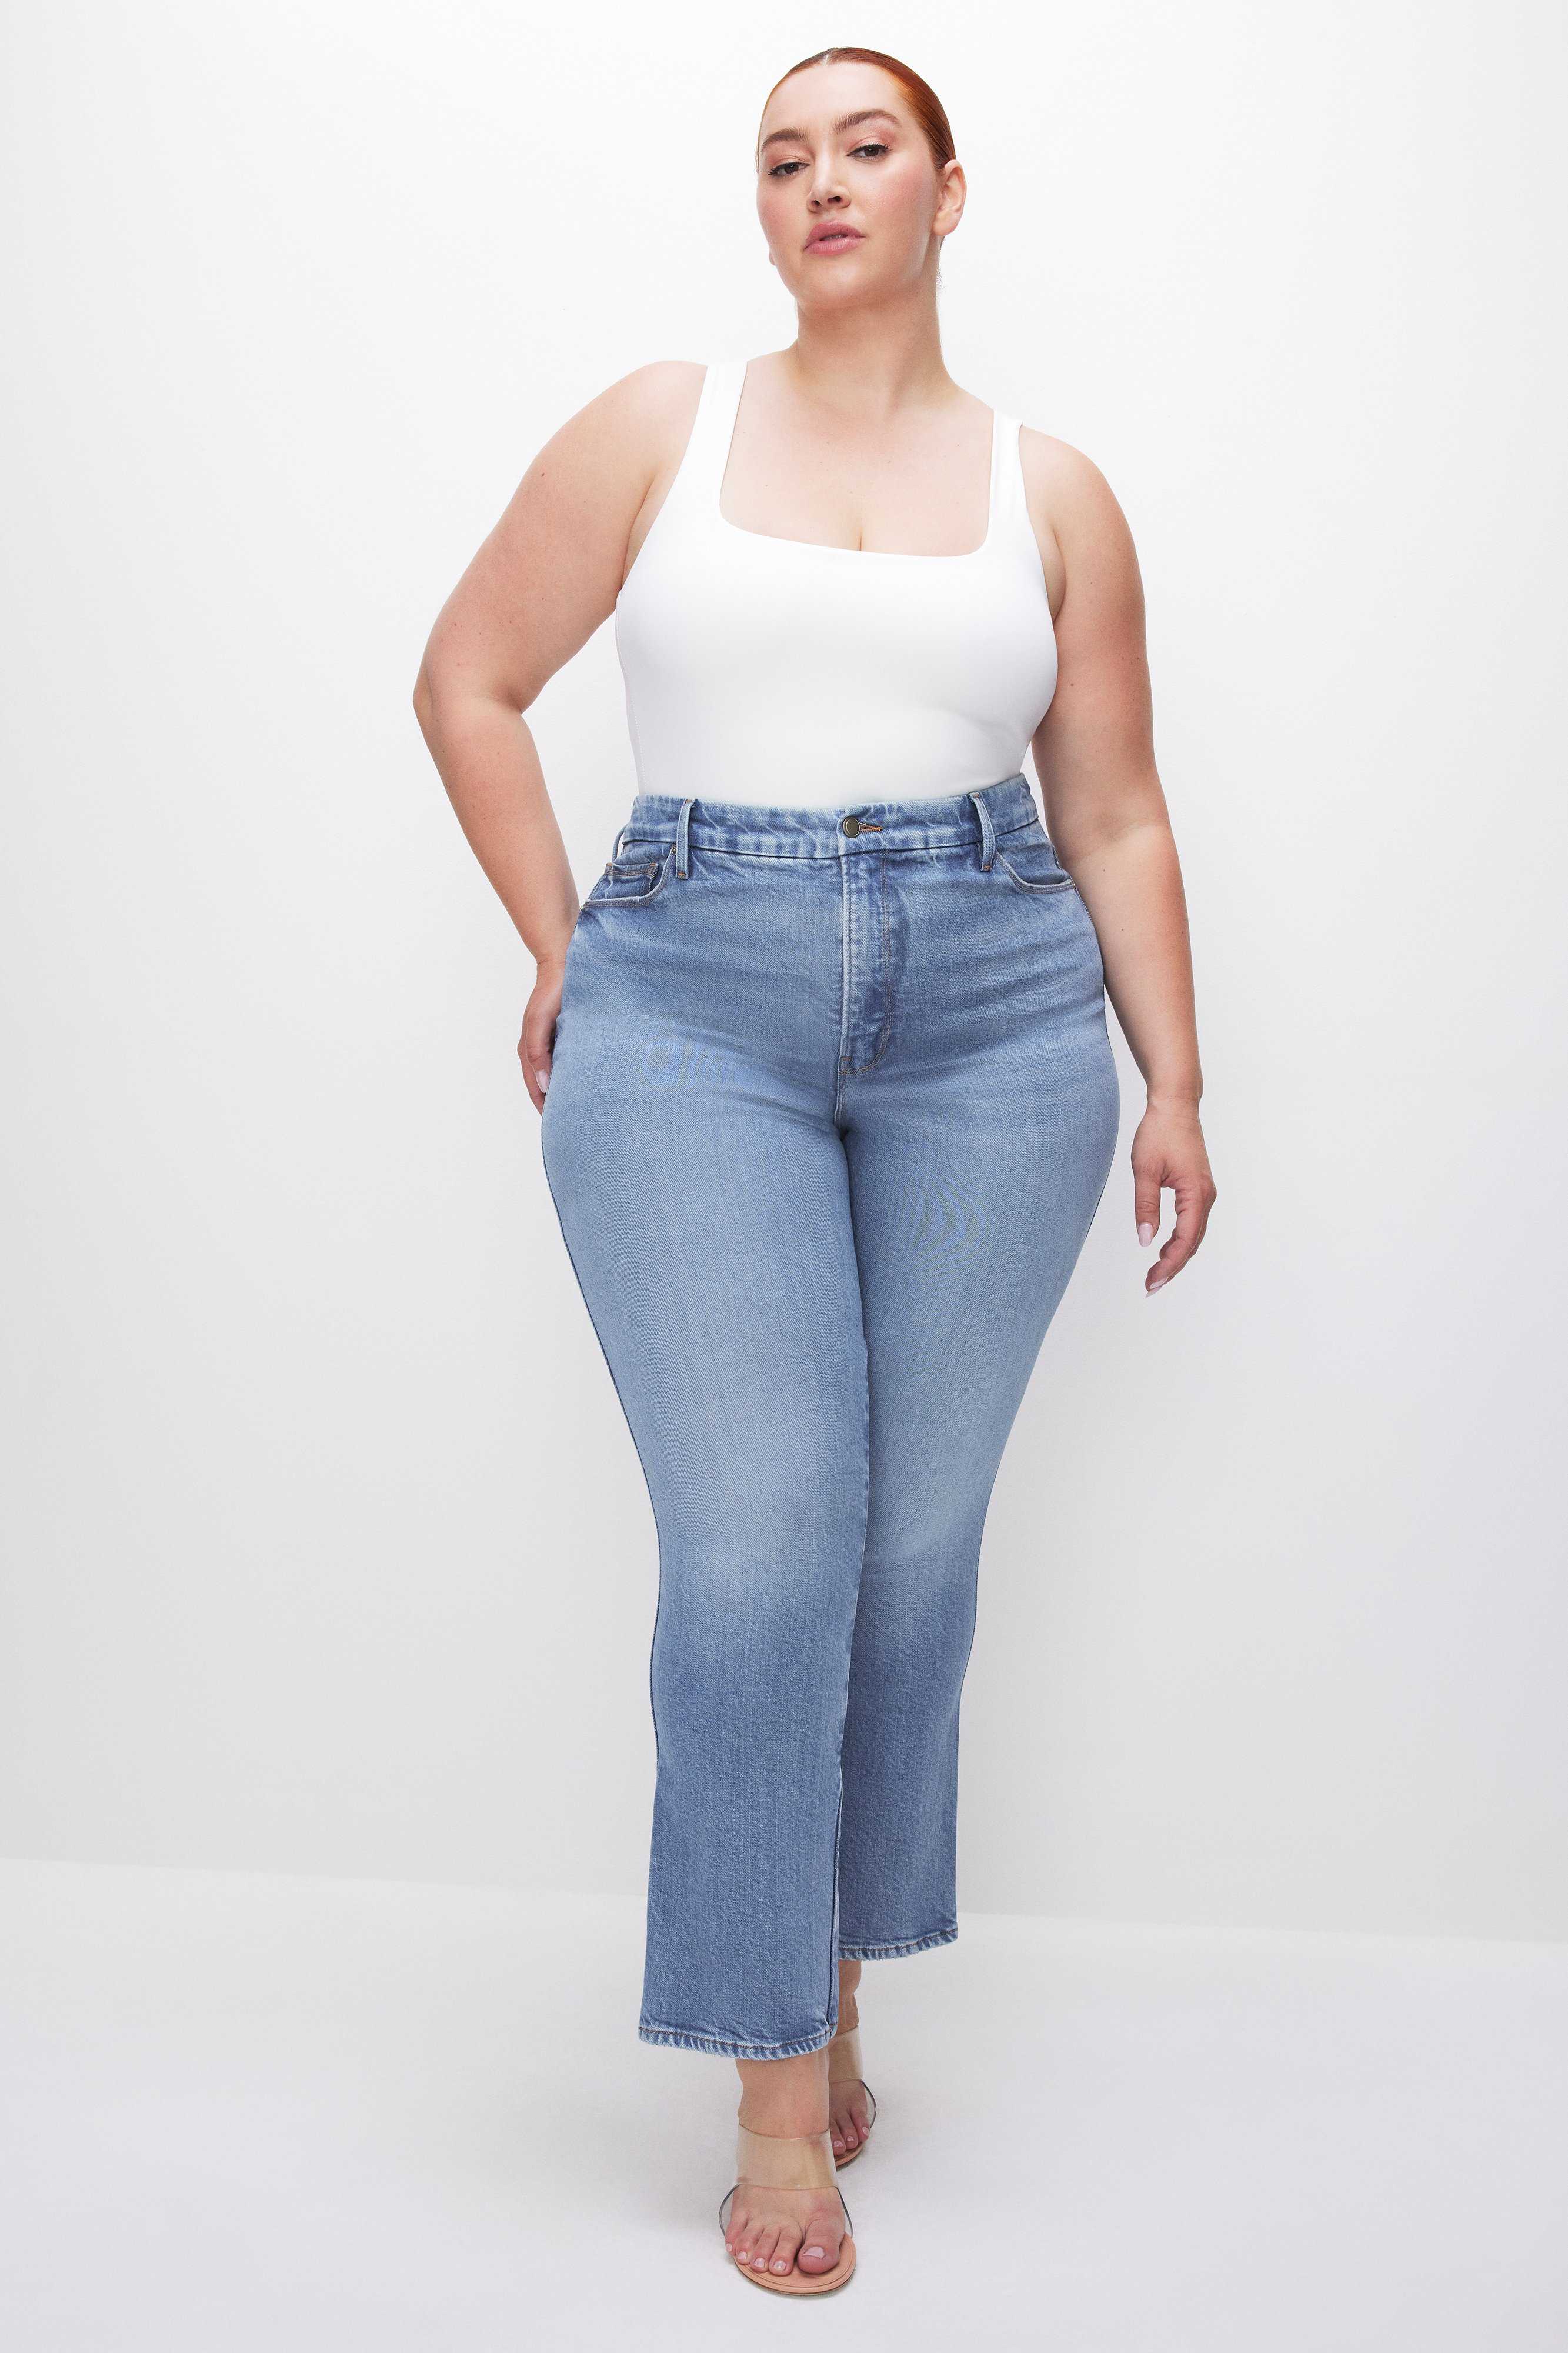 Best Jeans for Women With Wide Hips